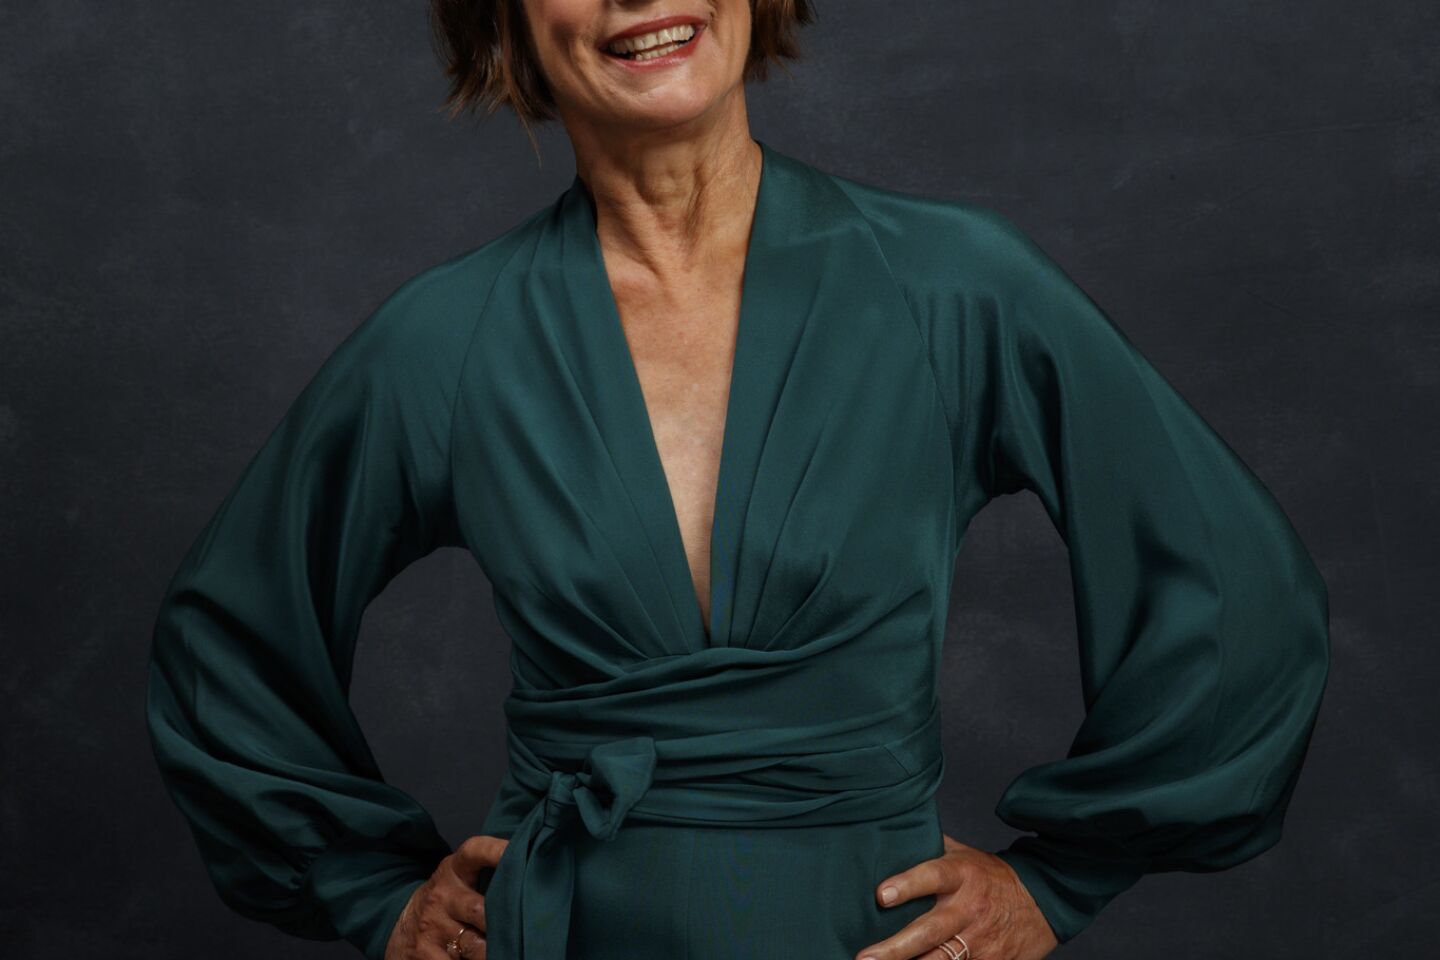 Celebrity portraits by The Times | Laurie Metcalf